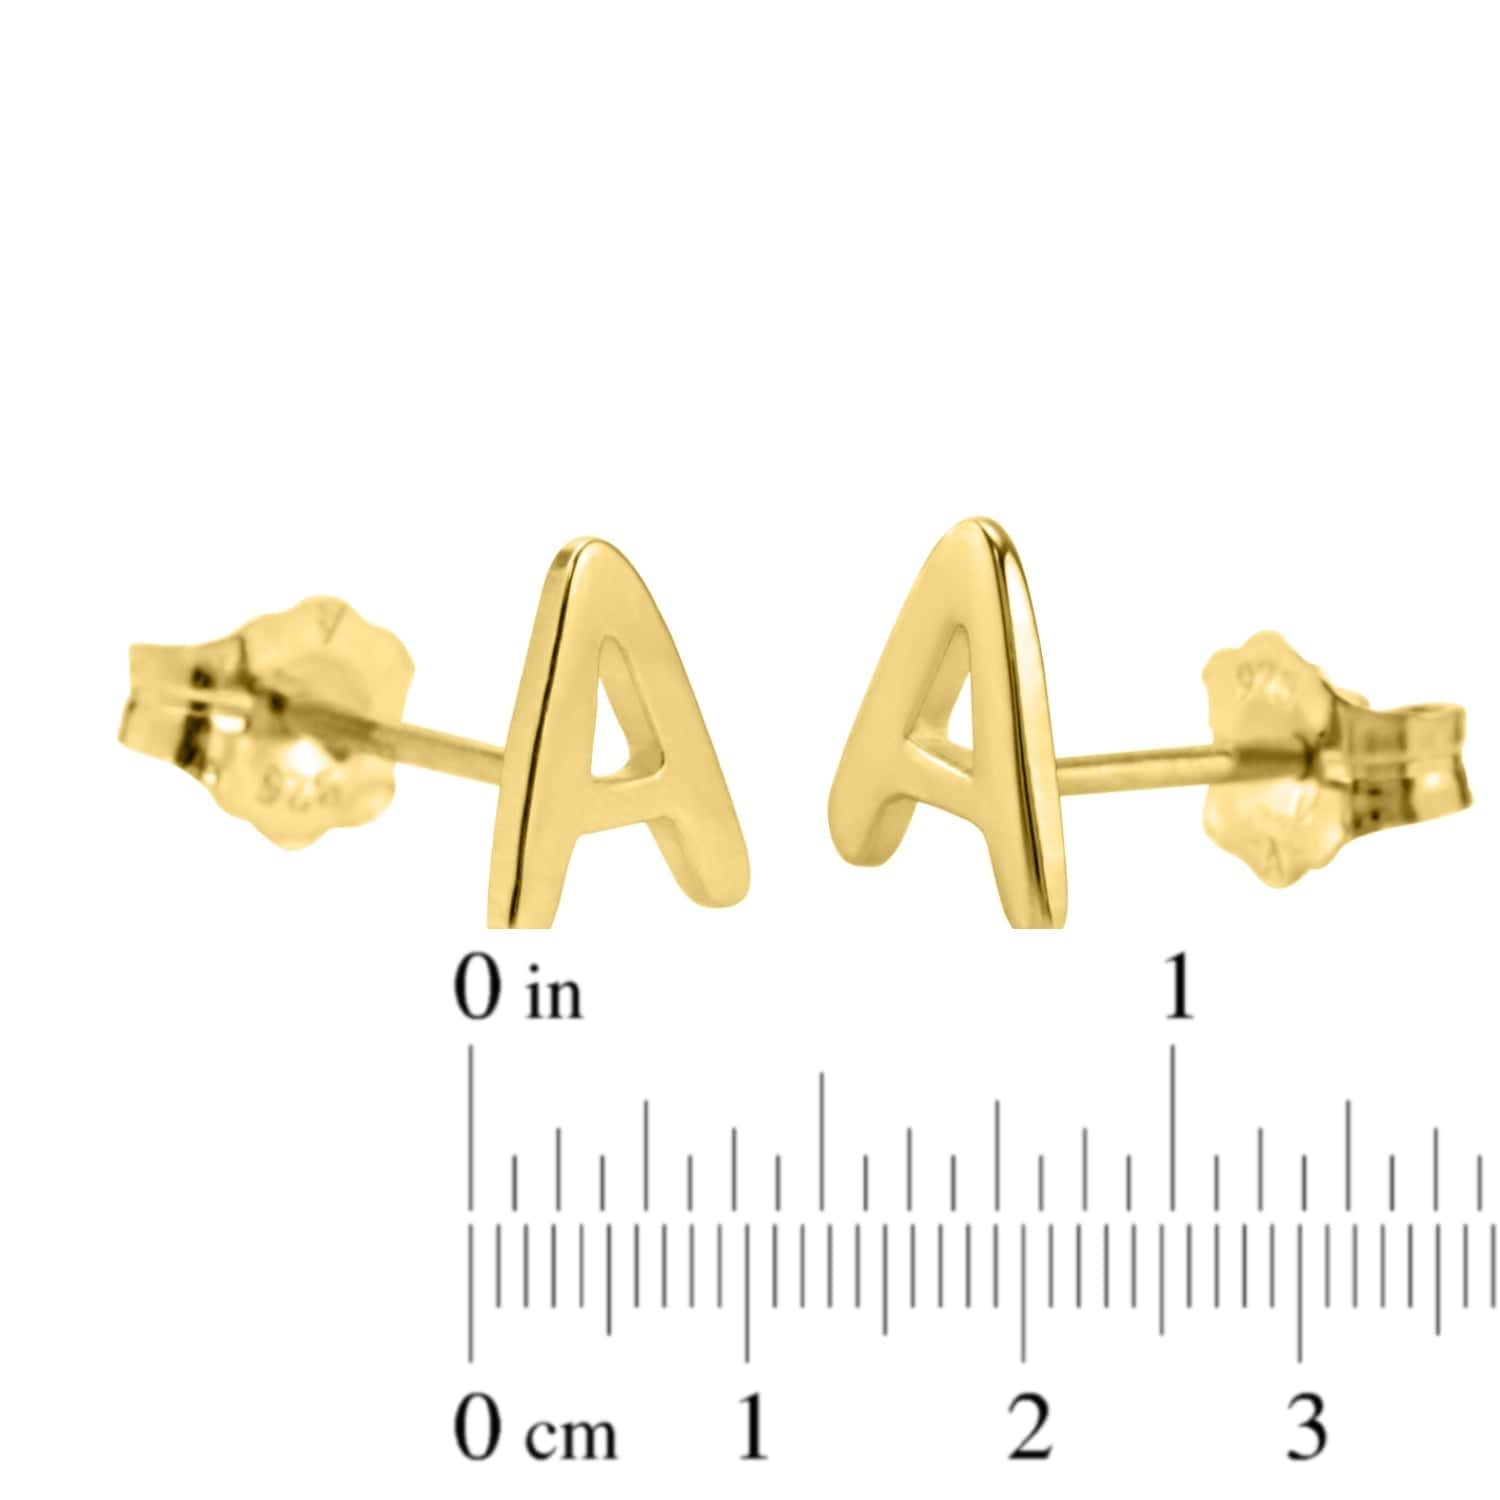 Gold Plated Copy of Initial Stud Earrings with CZ accent